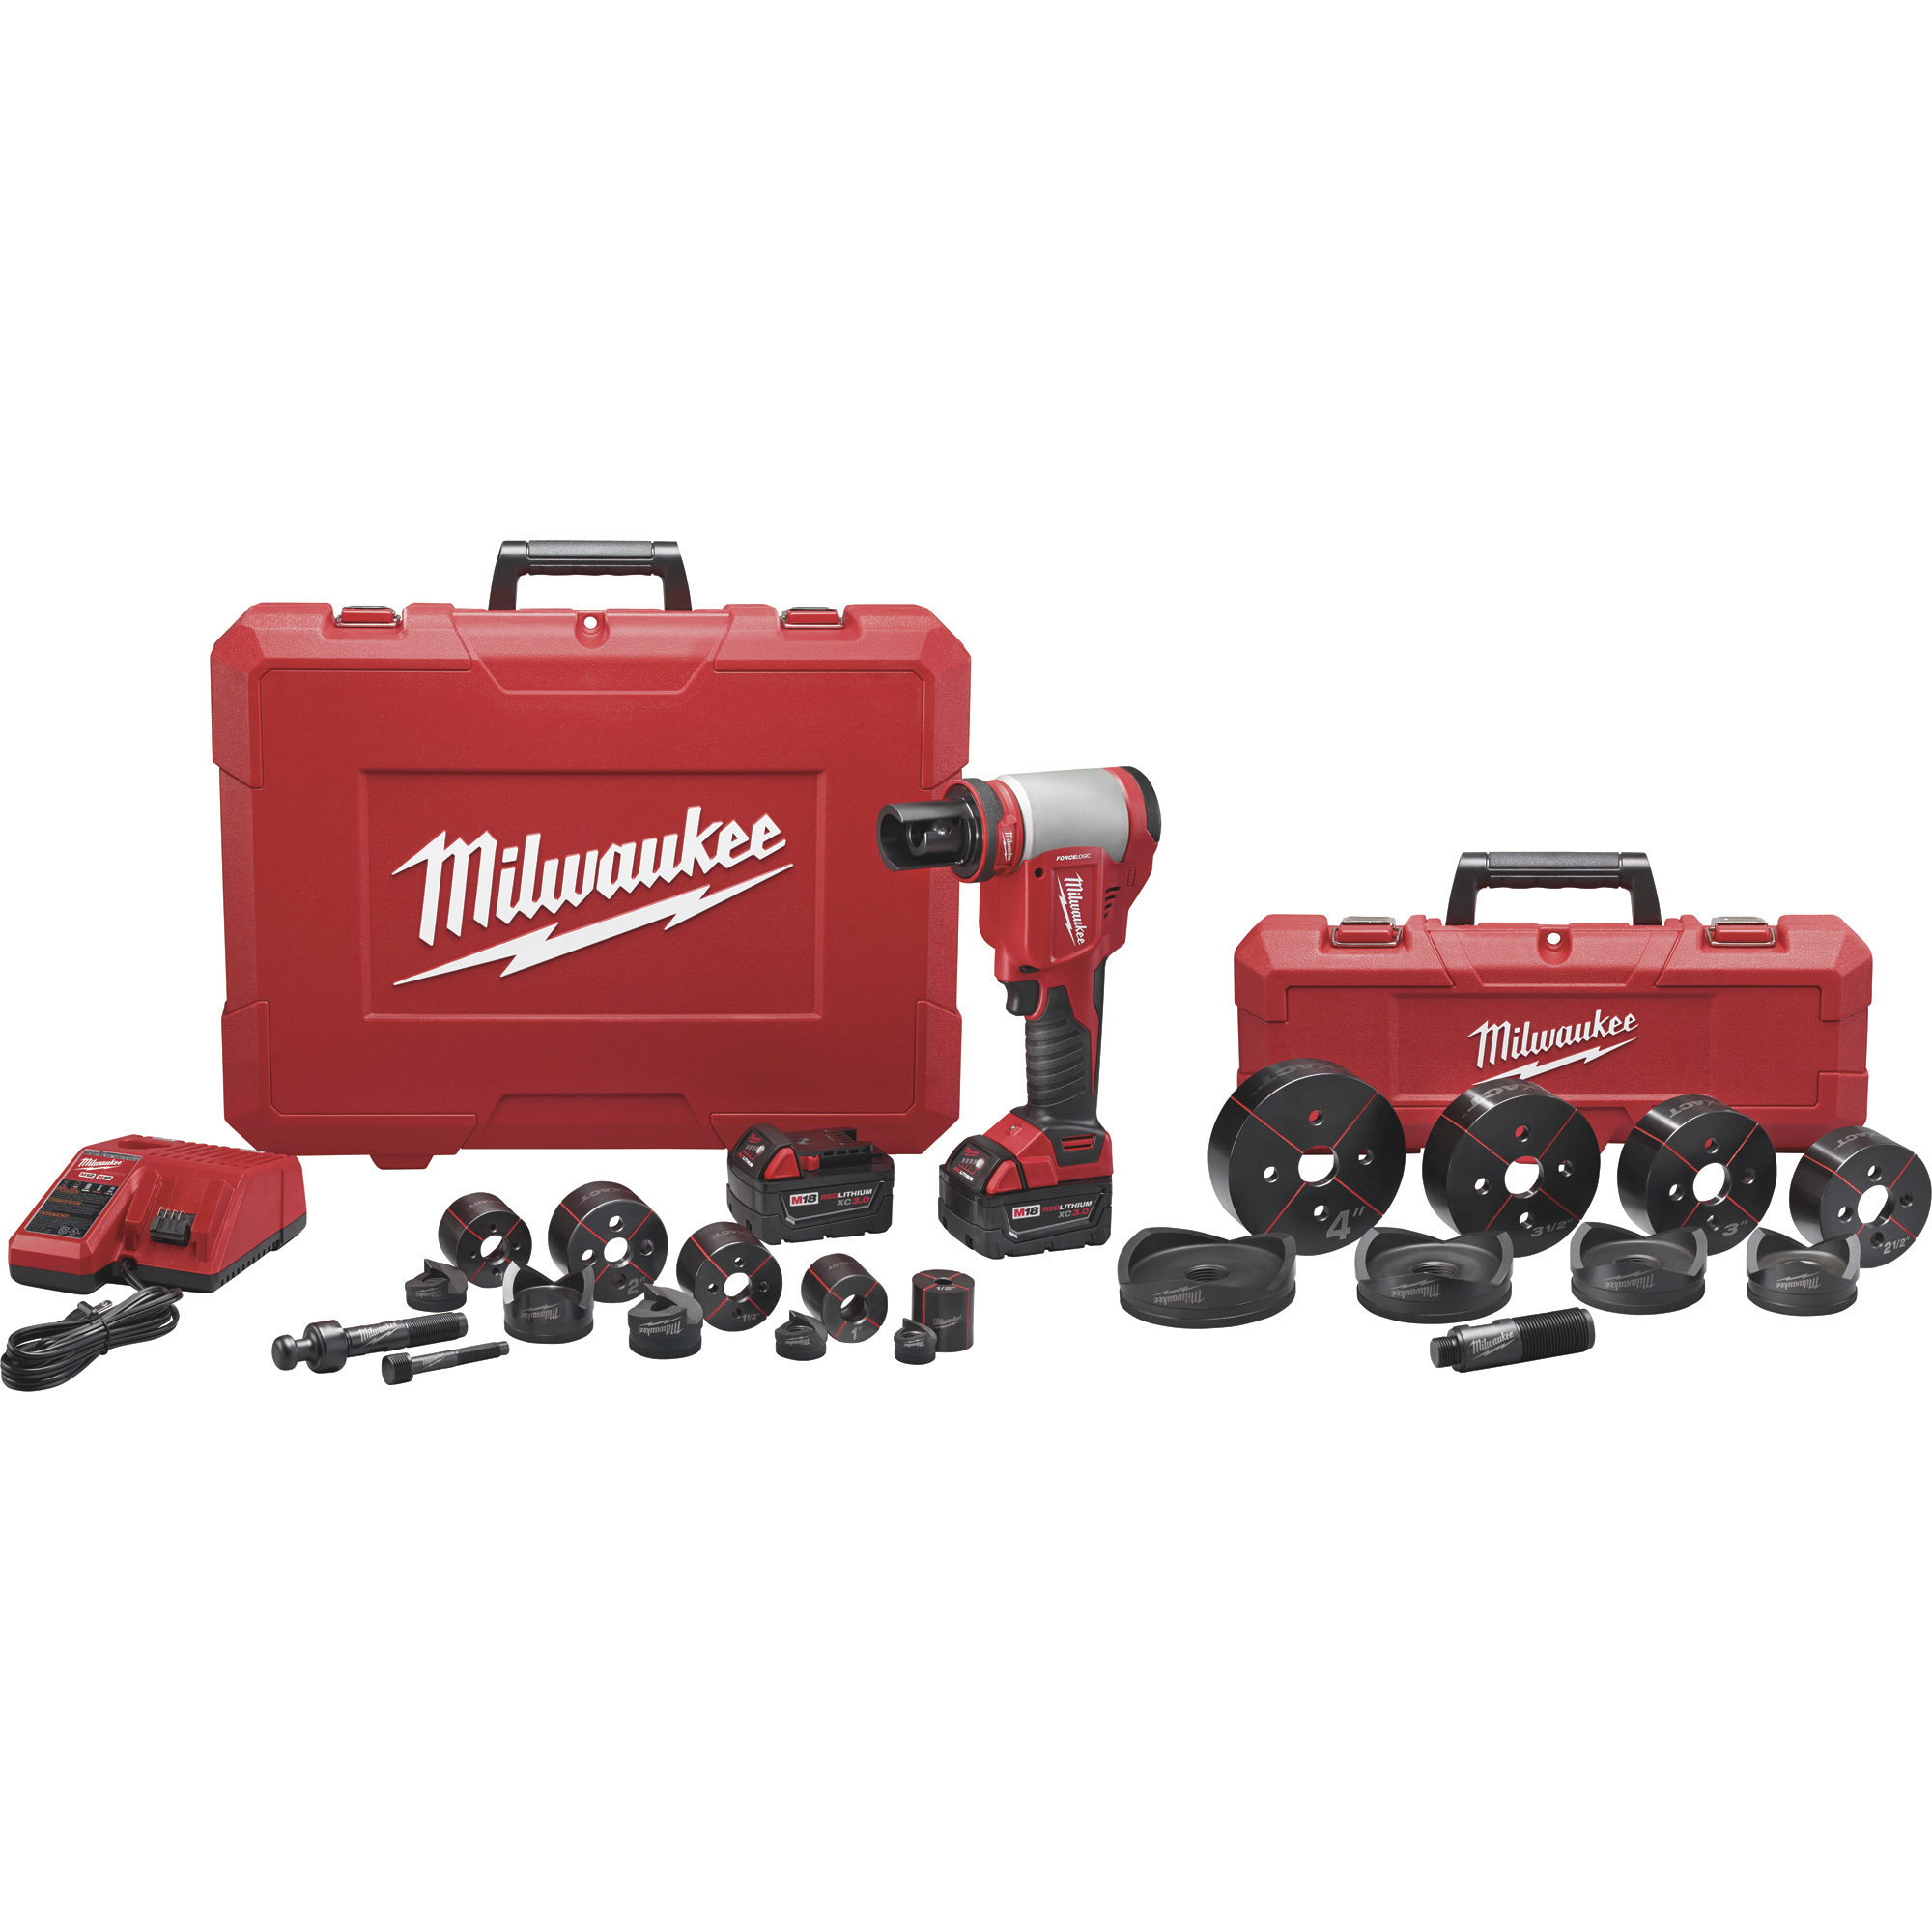 Milwaukee ForceLogic M18 Cordless Knockout Tool Kit, 6-Ton, 1/2Inch-4Inch, 1 Battery, Model 2677-23